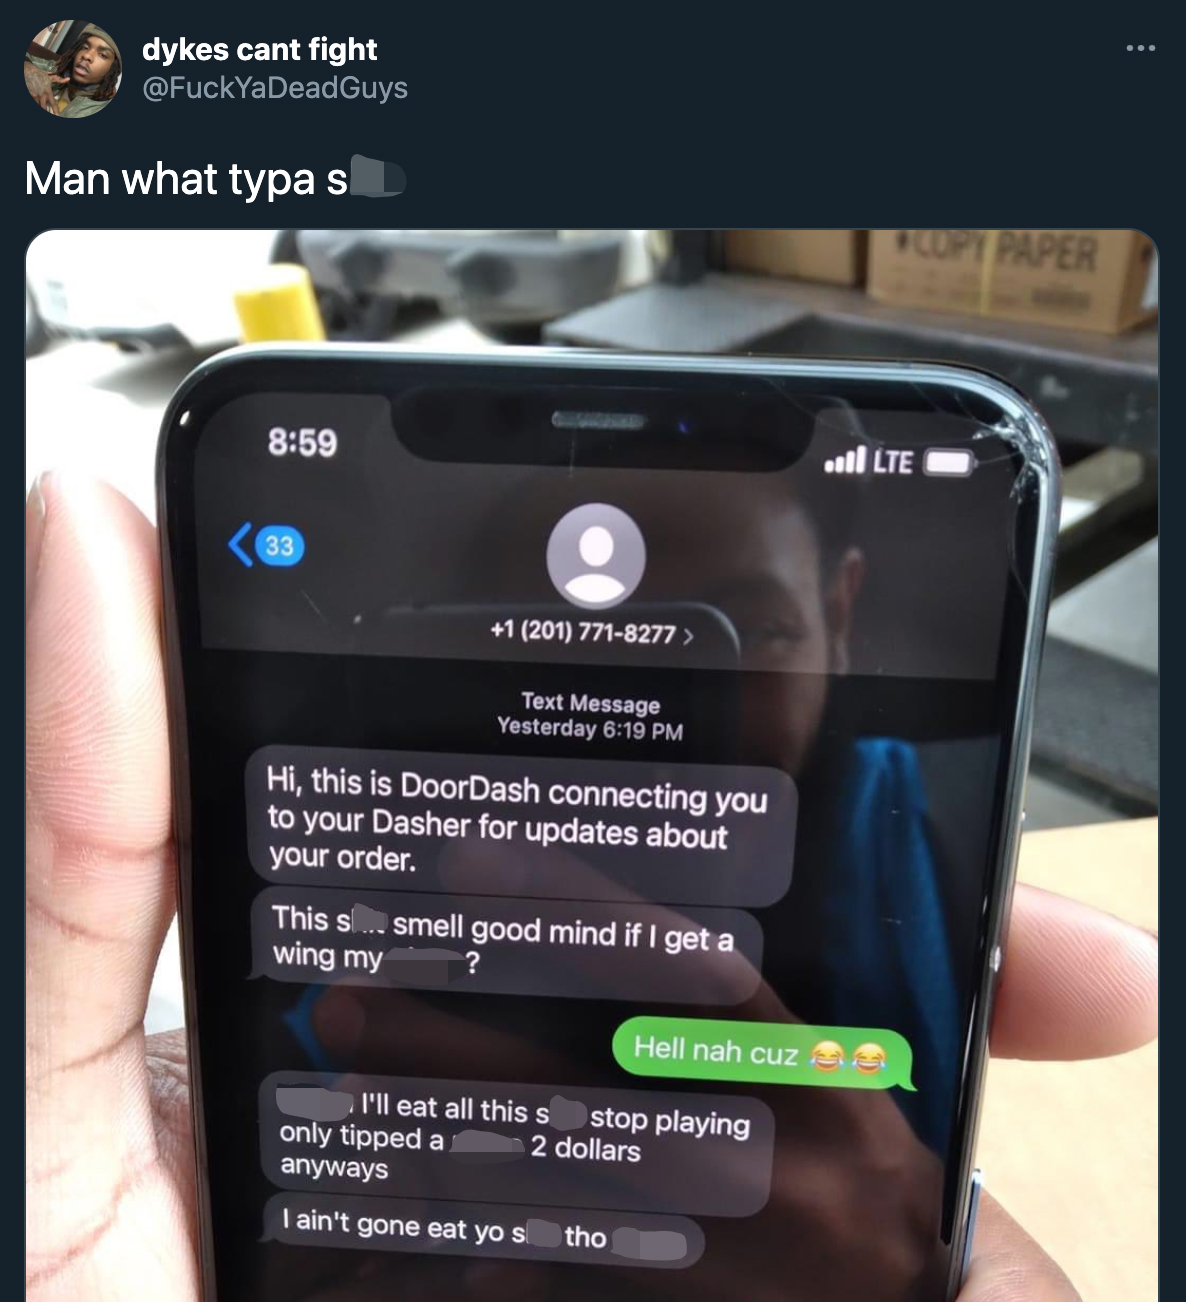 funny twitter jokes and memes - Hi, this is DoorDash connecting you to your Dasher for updates about your order. This shit smell good mind if I get a wing? Hell nan cuz I'll eat all this shit